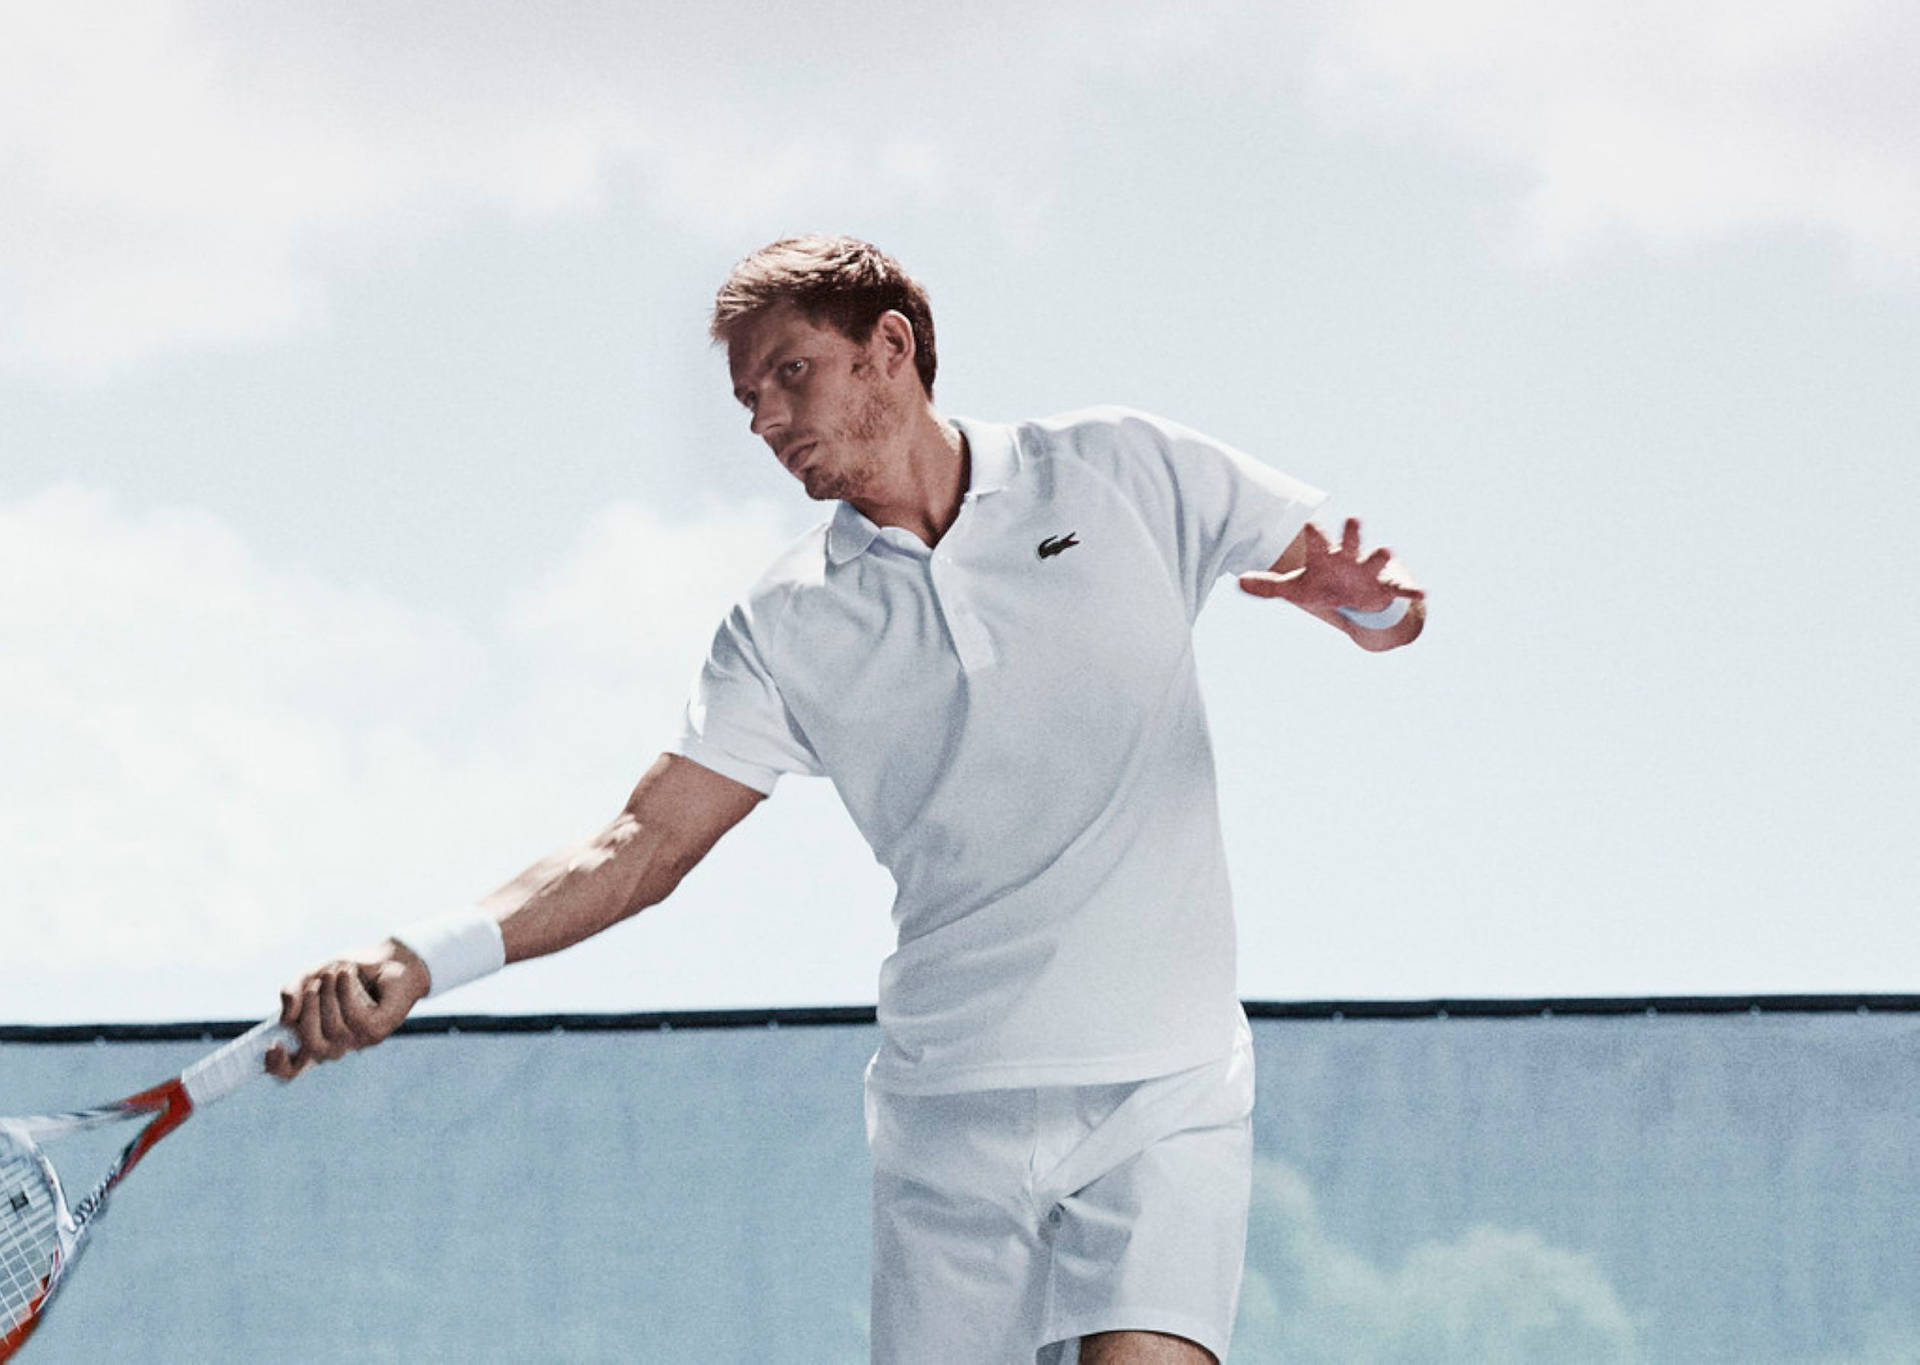 Nicolas Mahut donned in Lacoste sportswear, displaying a perfect pose with his tennis racquet. Wallpaper